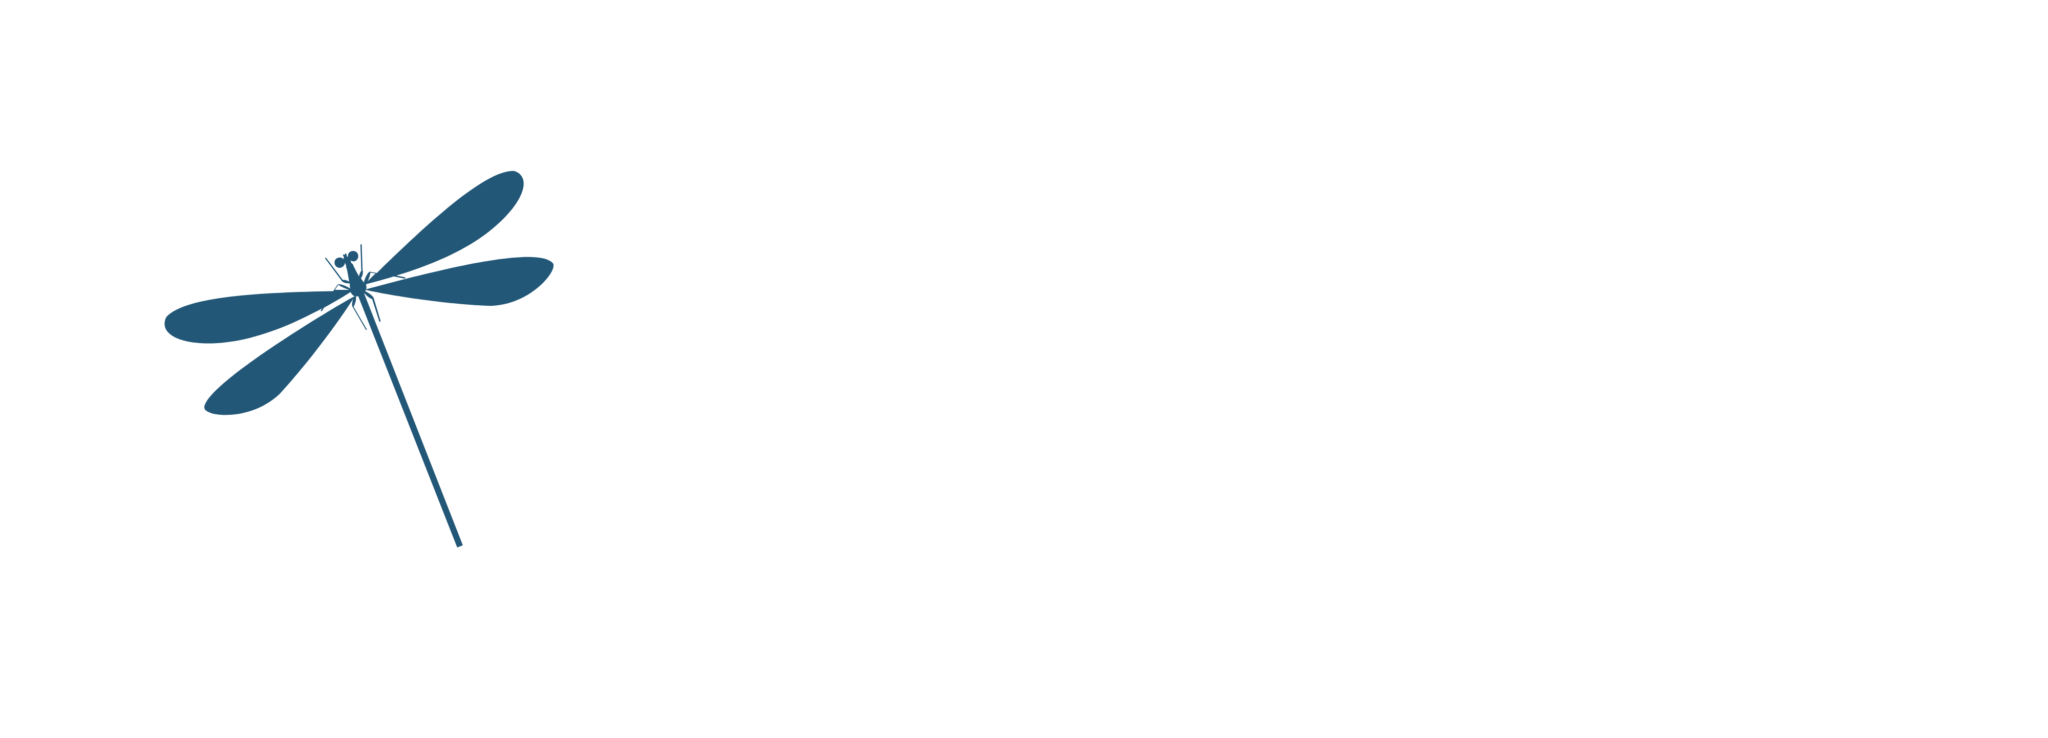 Authentic Physician Healthcare